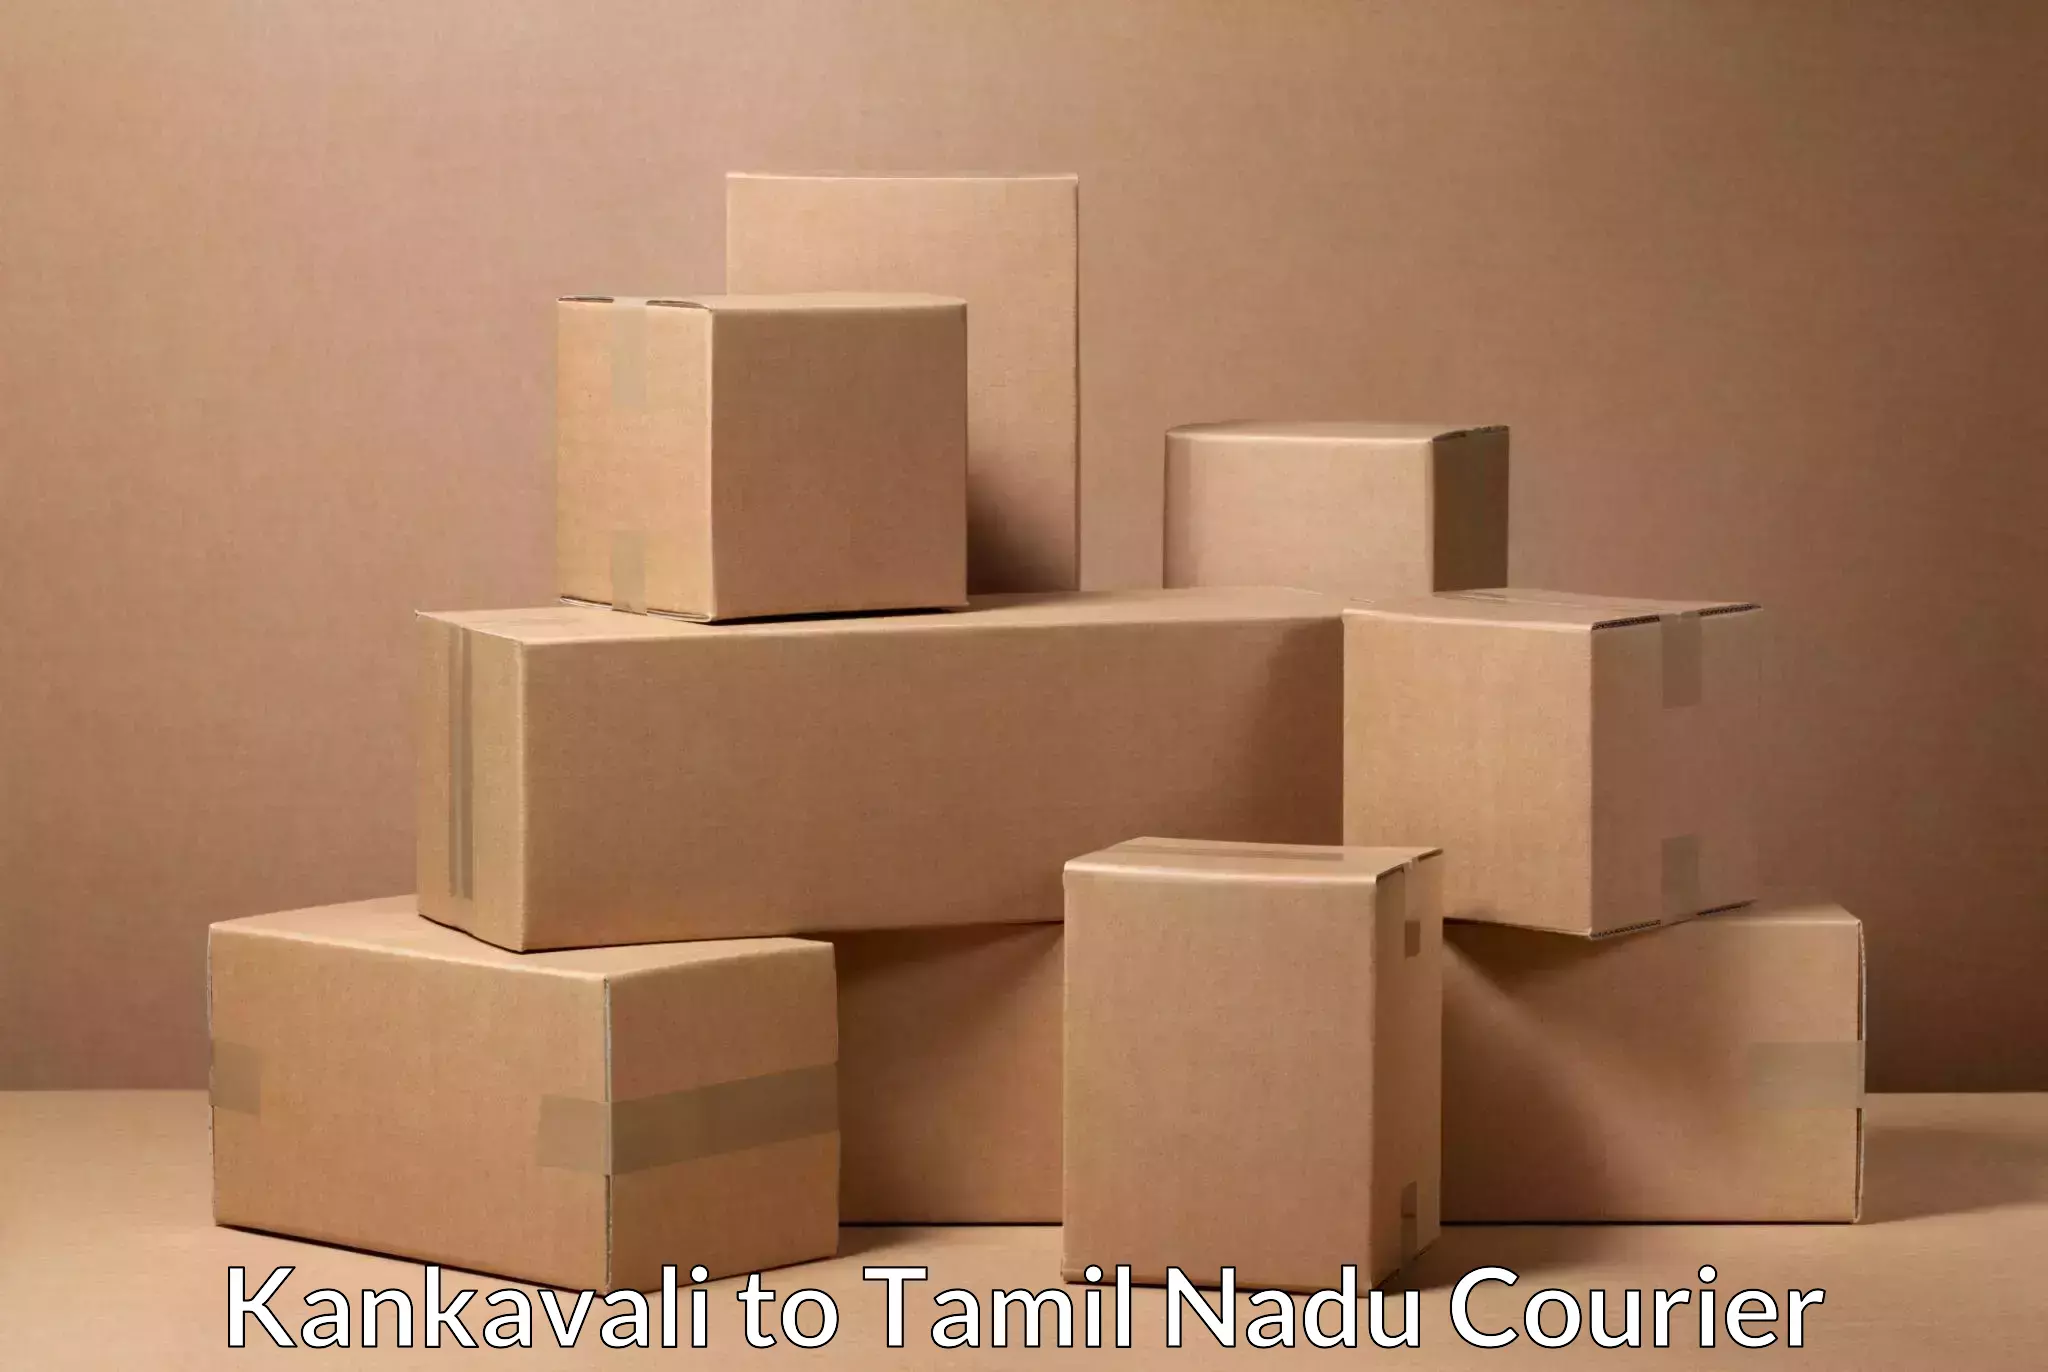 Flexible delivery scheduling Kankavali to Srivaikuntam